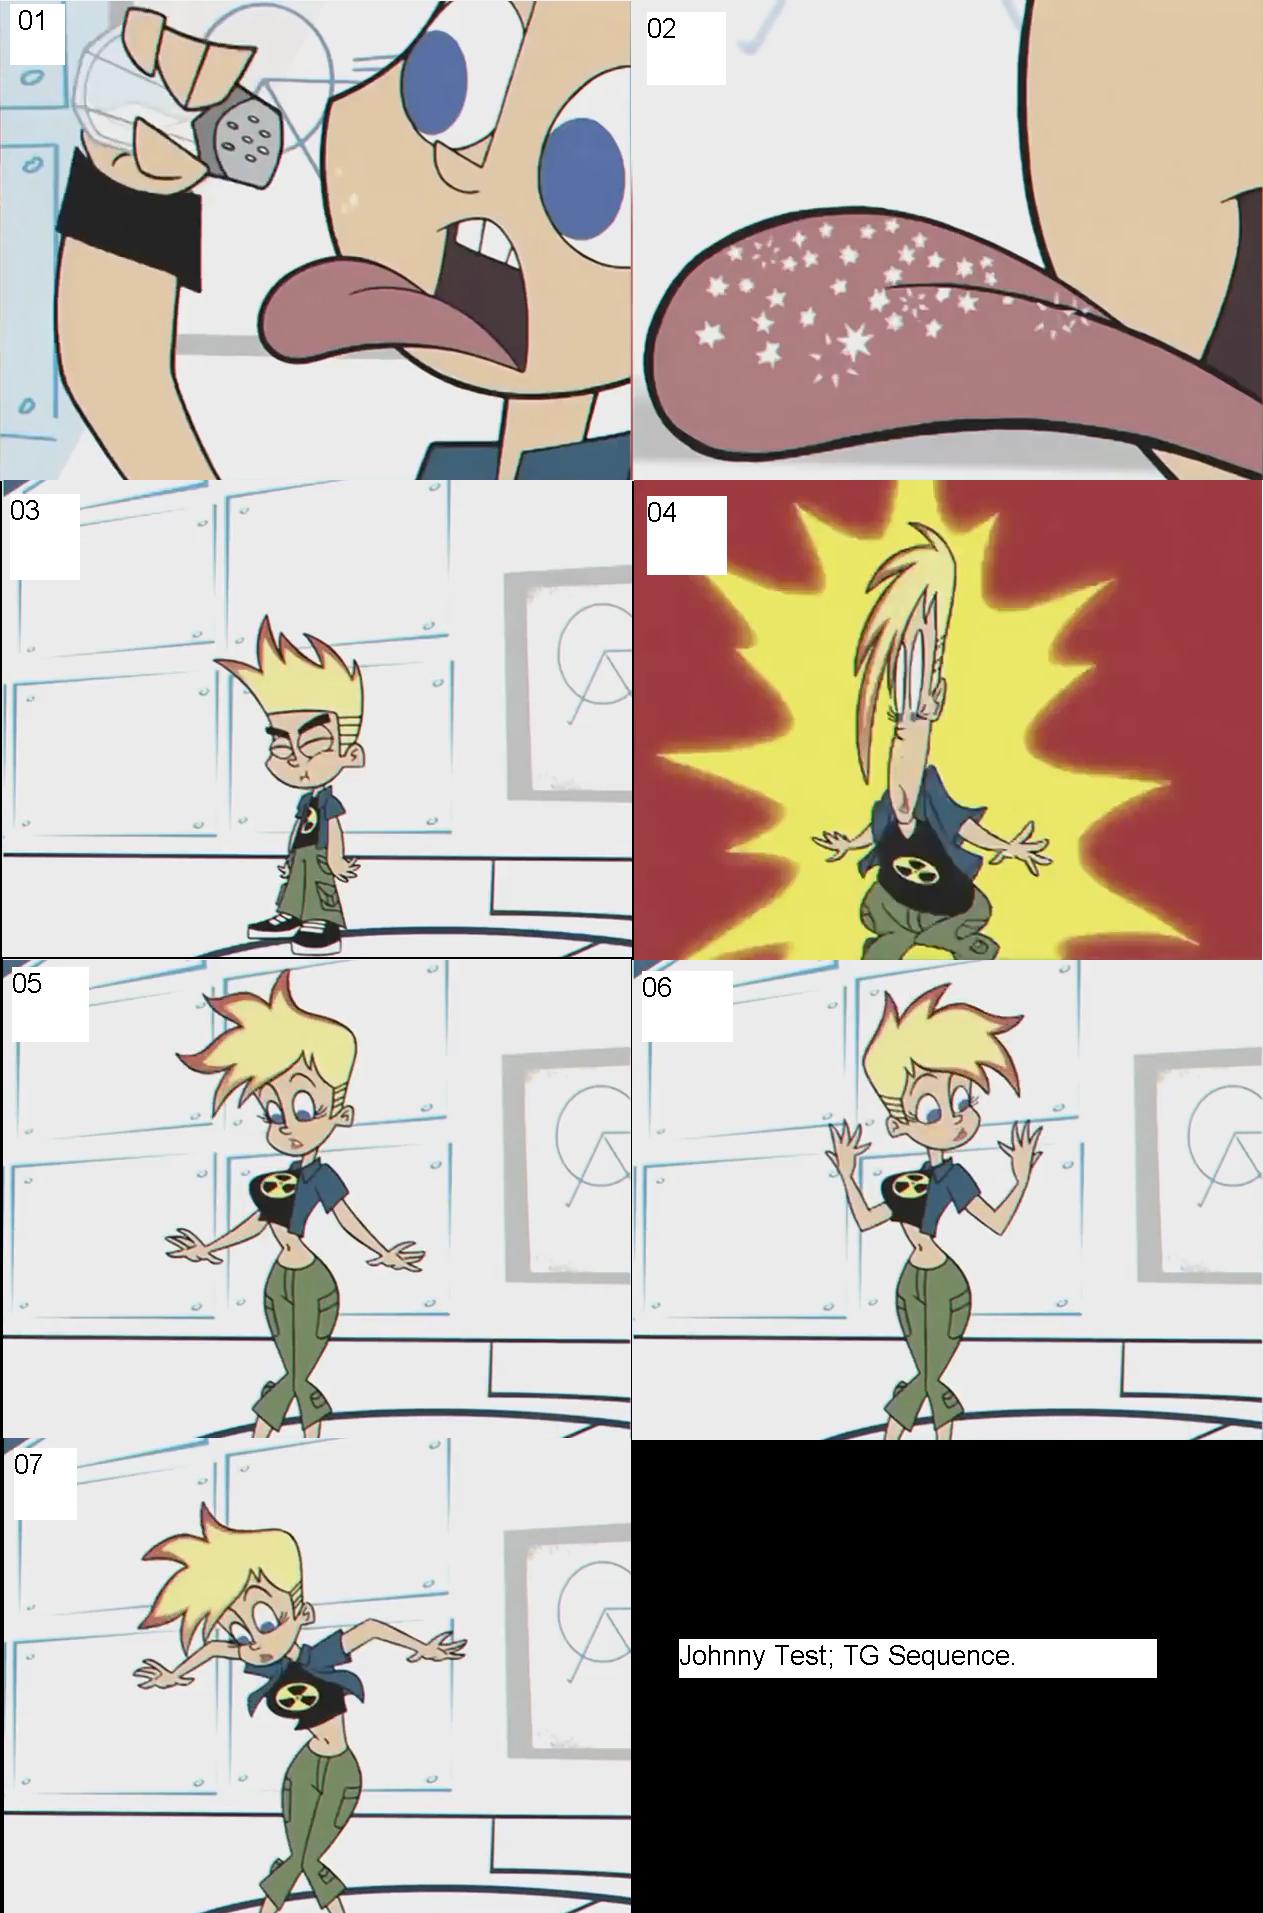 Johnny Test Tg Porn - Johnny Test Gender Bender Collection - Page 4 - HentaiRox